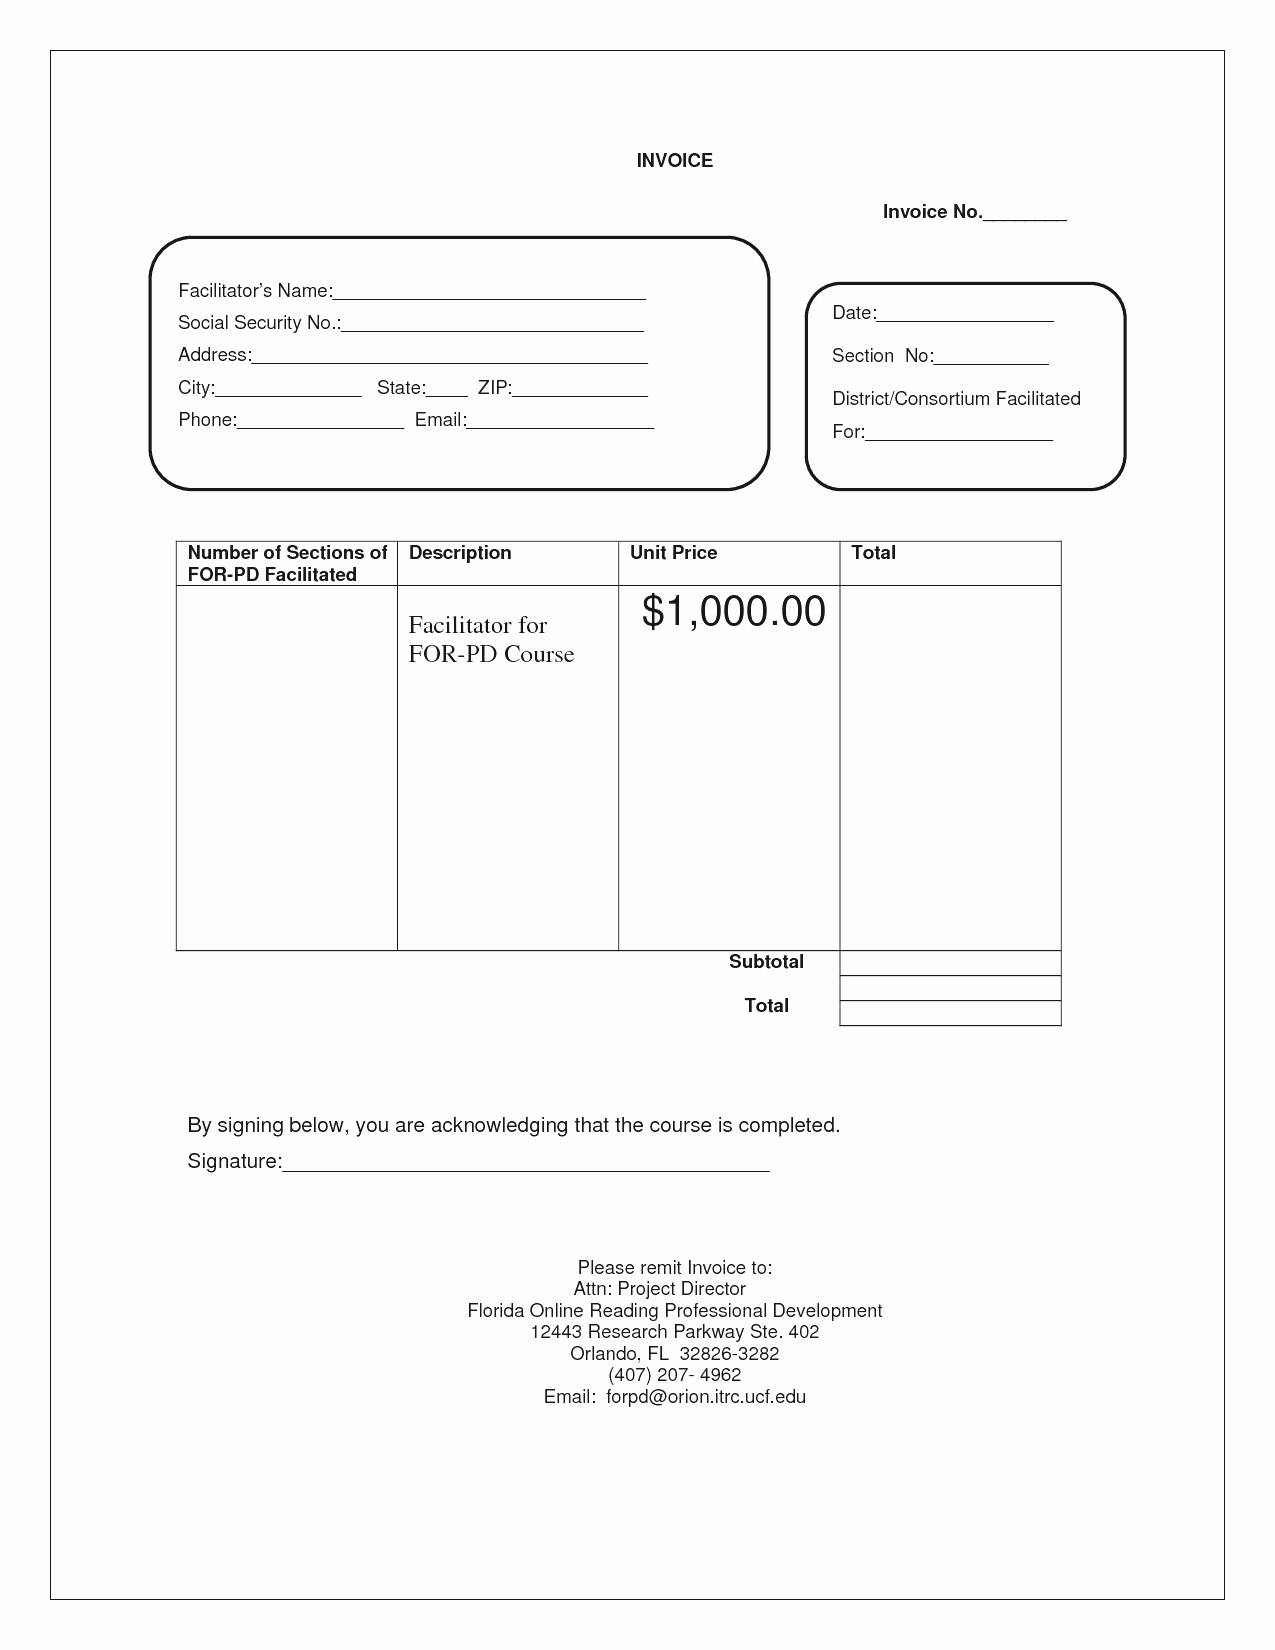 Blank Invoice Template Pdf Fresh Blank Invoices Free Residers Info Print Invoice Template